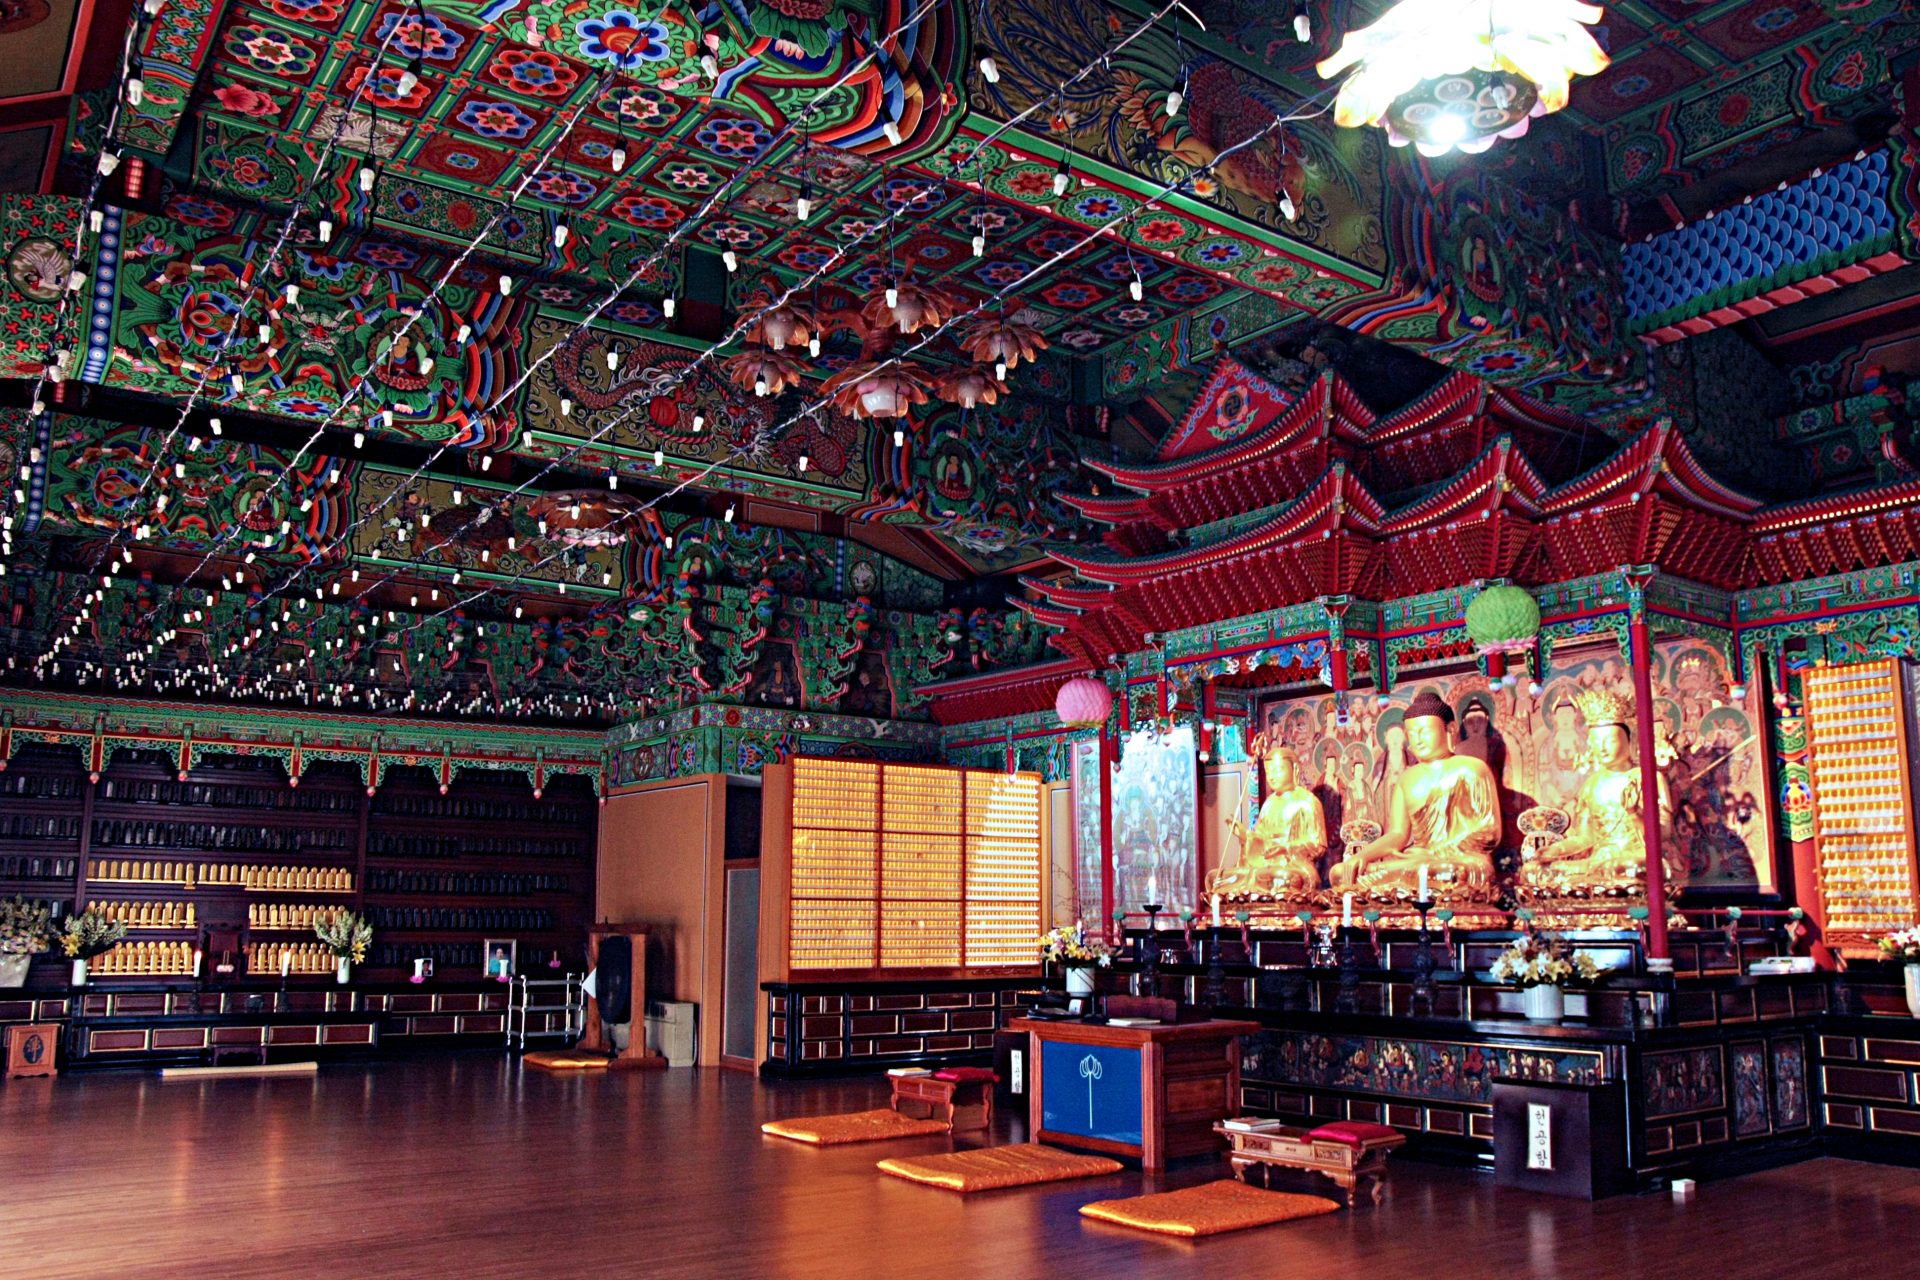 <p>It was founded in 1405 as a villa but came to be used as a replacement for the main palace (Gyeongbokgung Palace) after it was burnt down in the war. This royal palace has maintained most of its original appearance and is also registered as a World Heritage Site.</p>